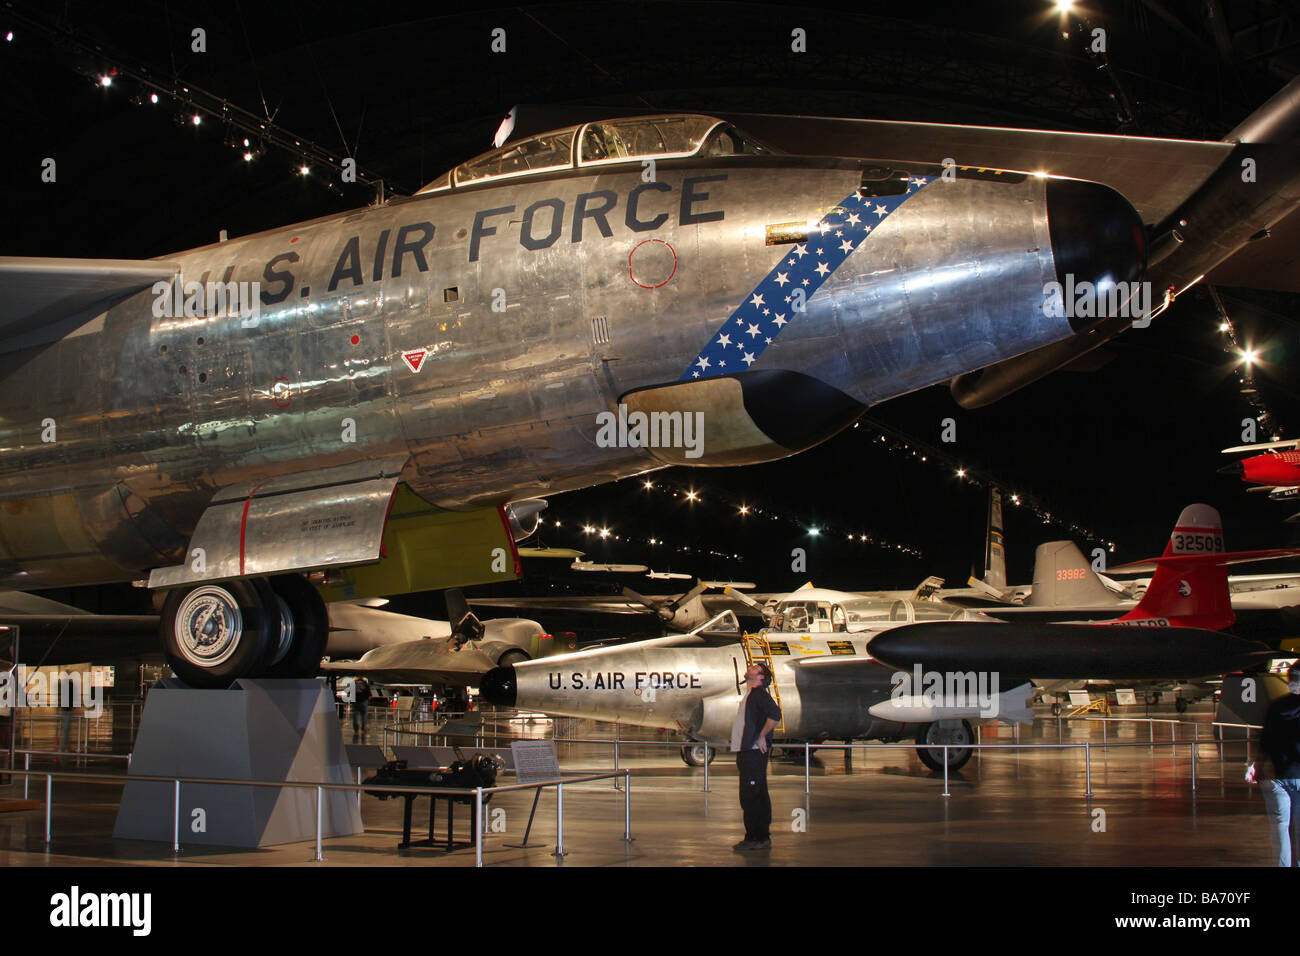 United States Air Force Museum Dayton, Ohio Wright Patterson base Foto Stock